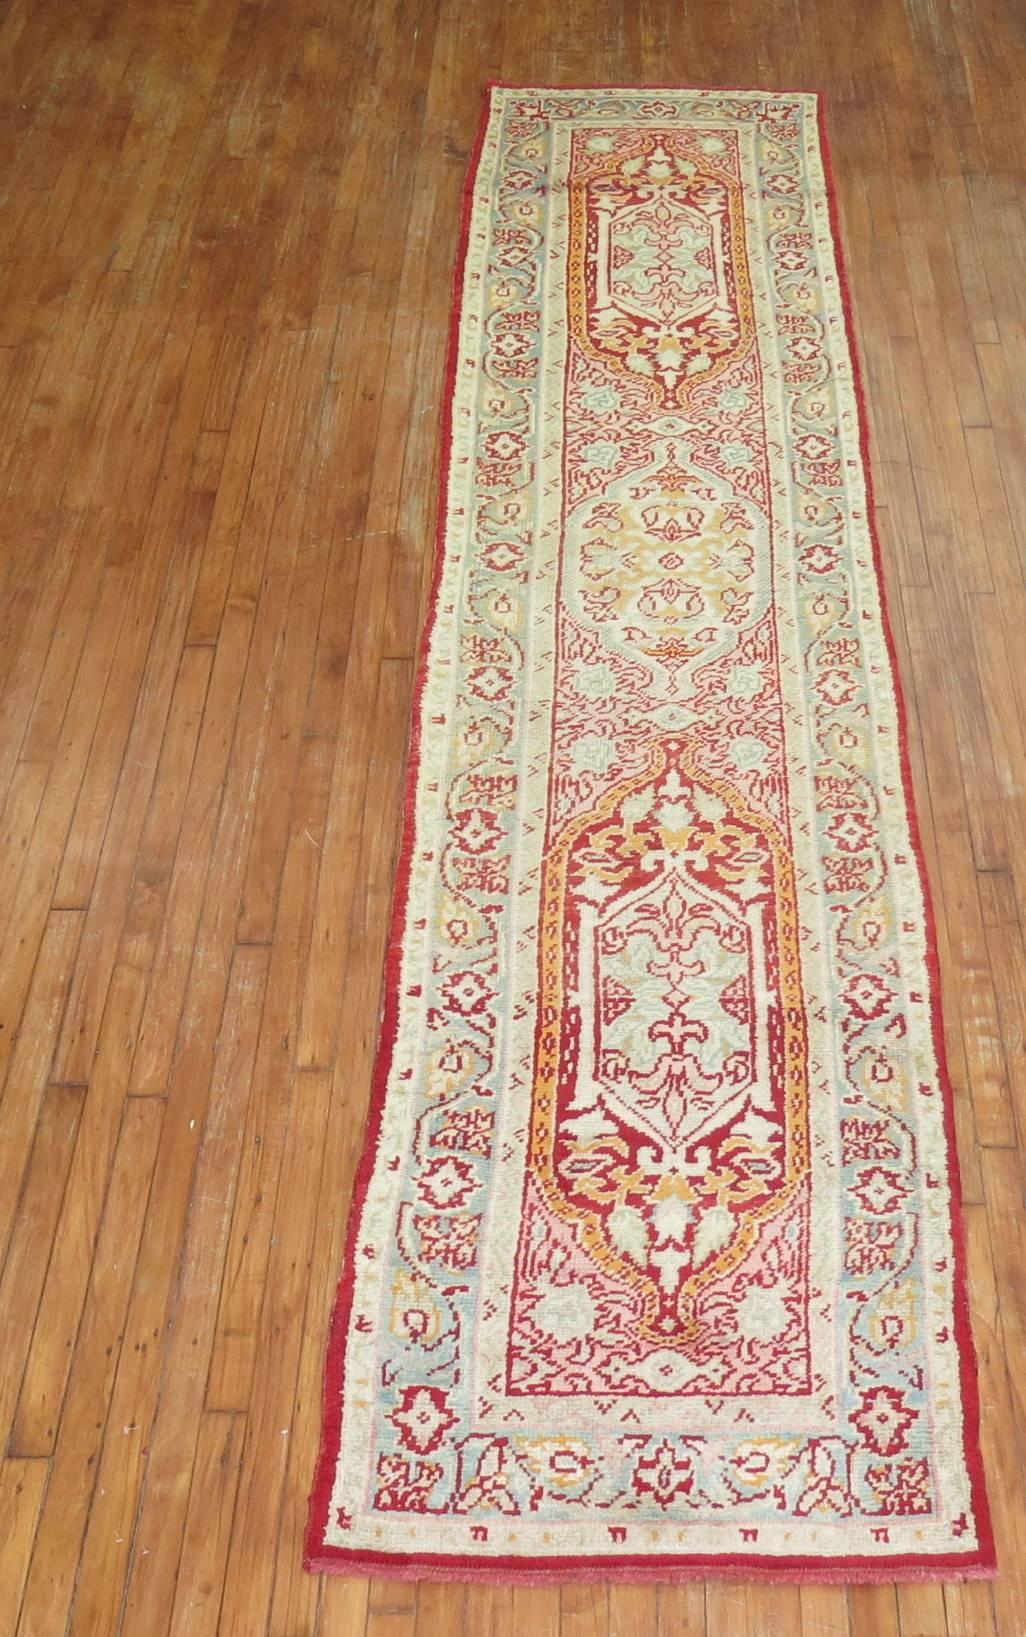 An early 20th century elegant handmade antique Turkish Oushak runner featuring three medallions on a pinkish red field surrounded by a mint green border.

Measures: 2'9